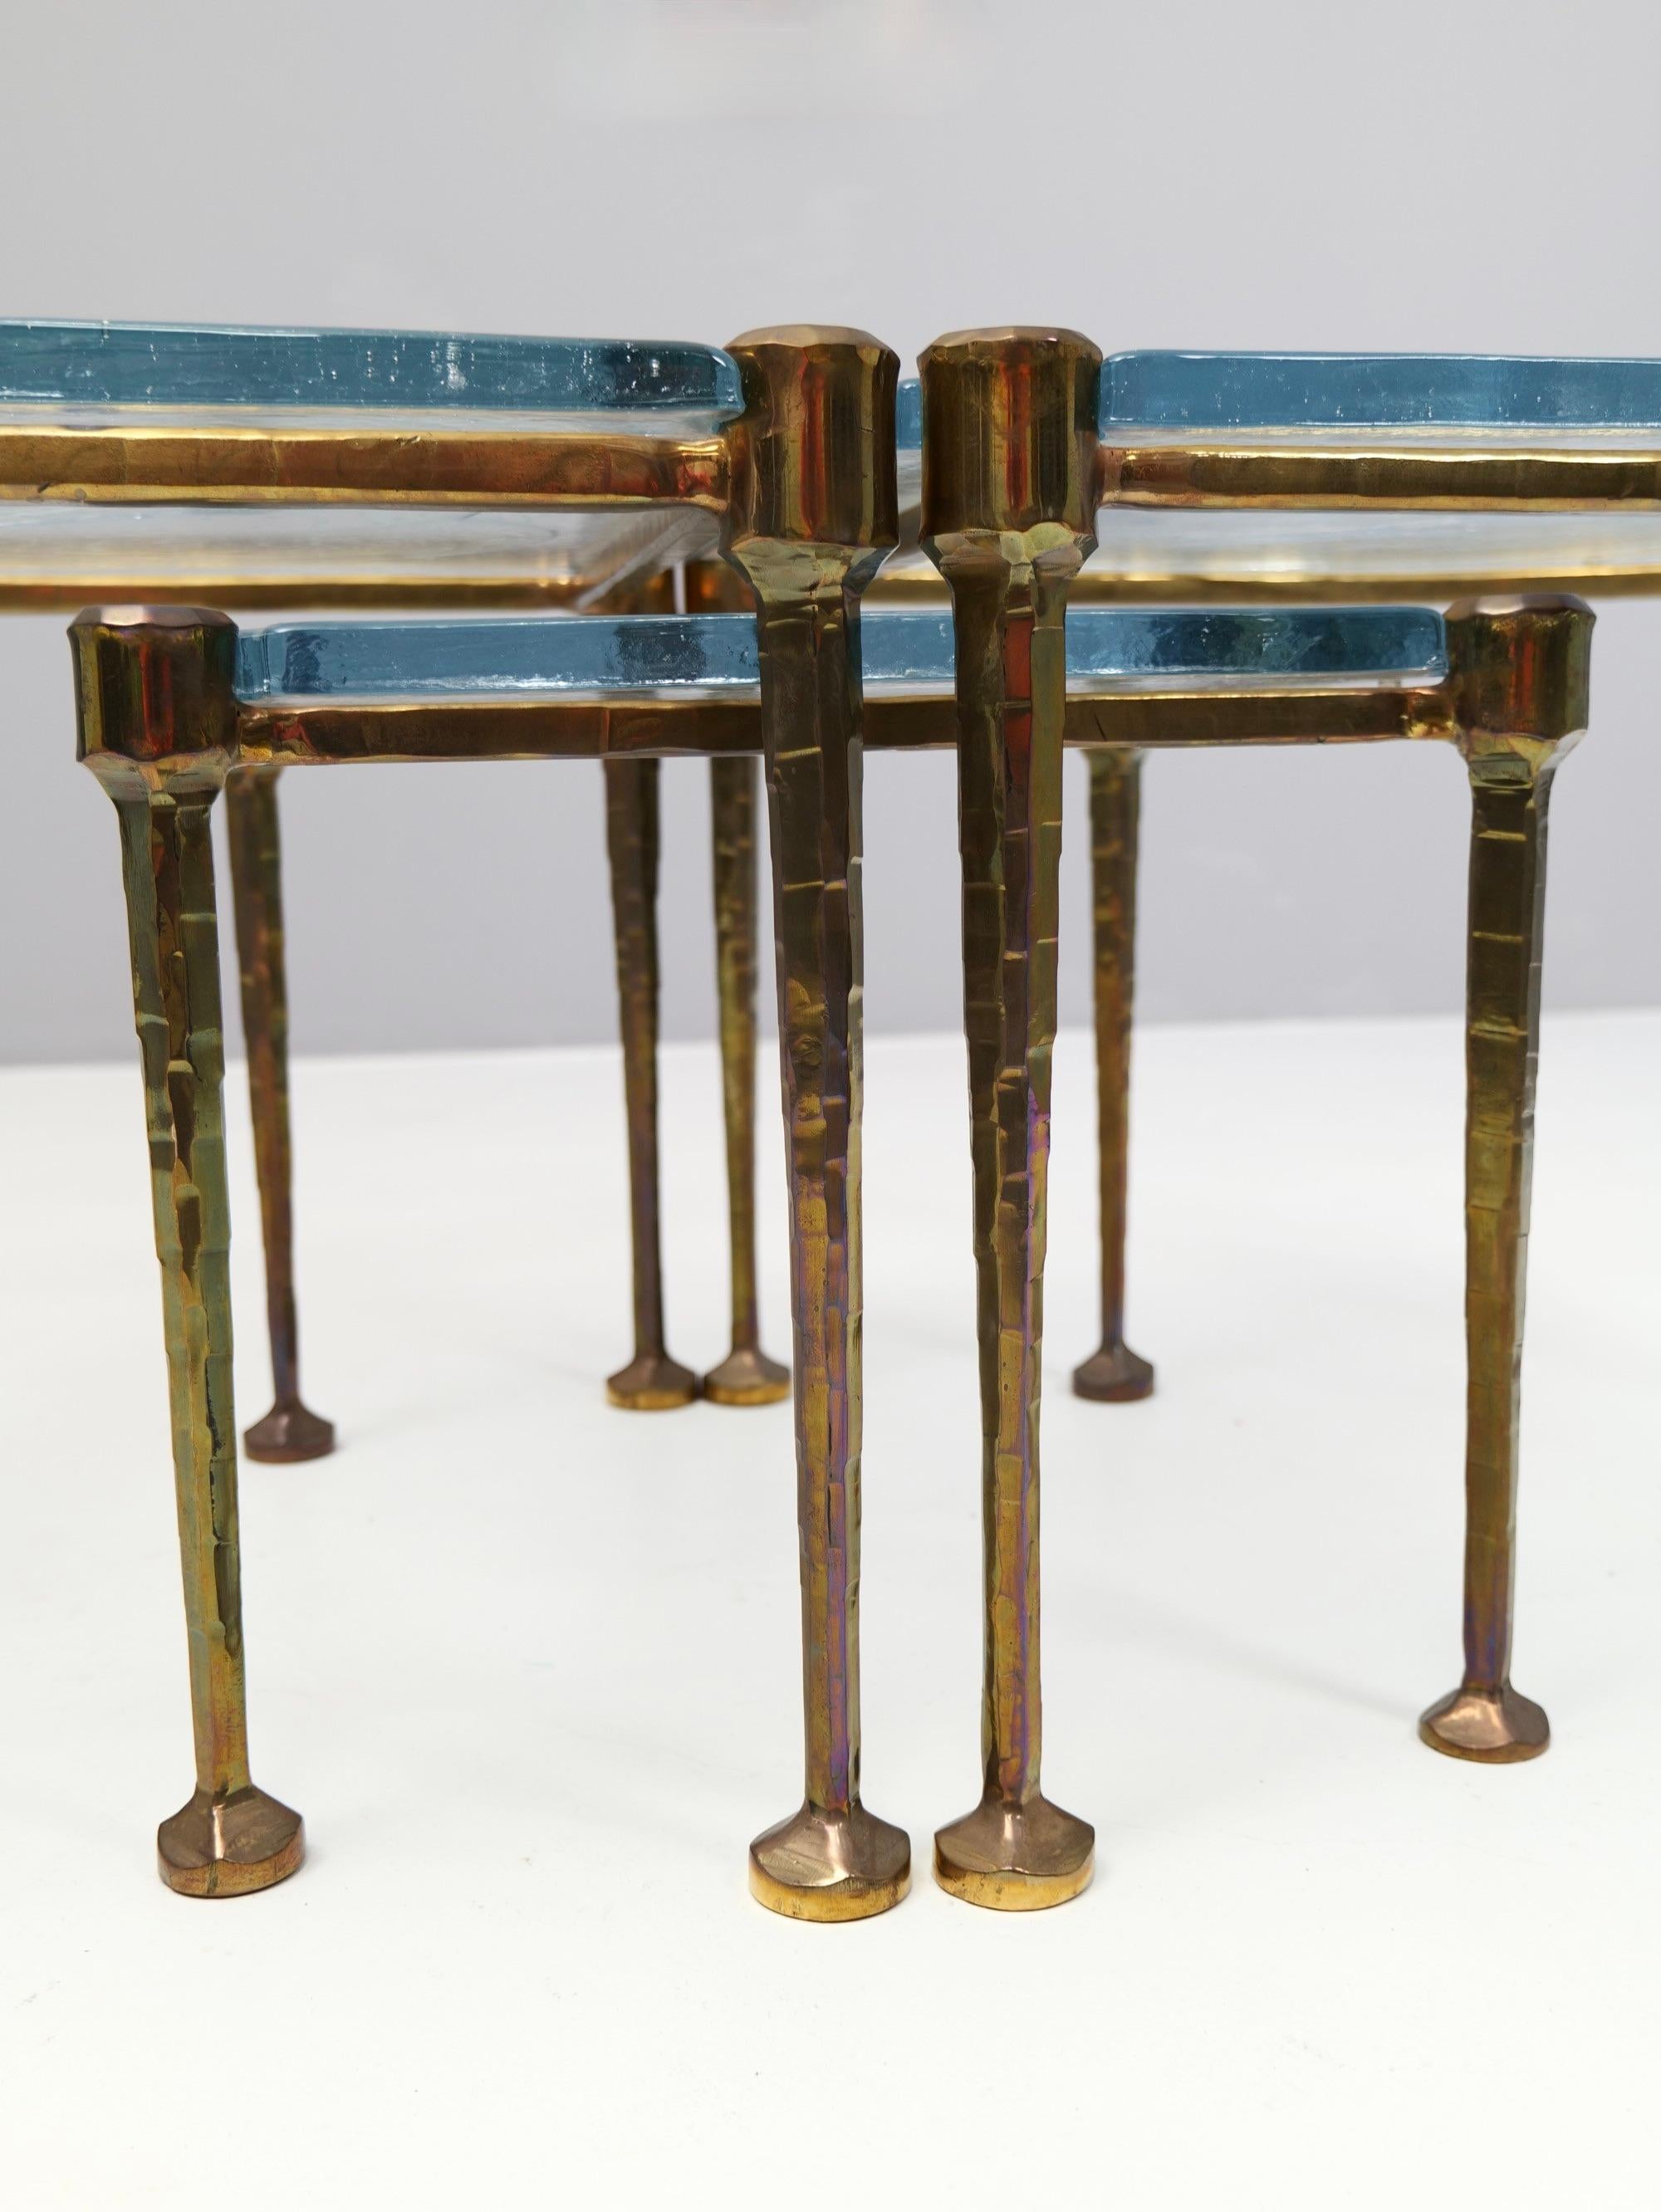 forged bronze tables with blue cast glass - 1980s brutalist 4